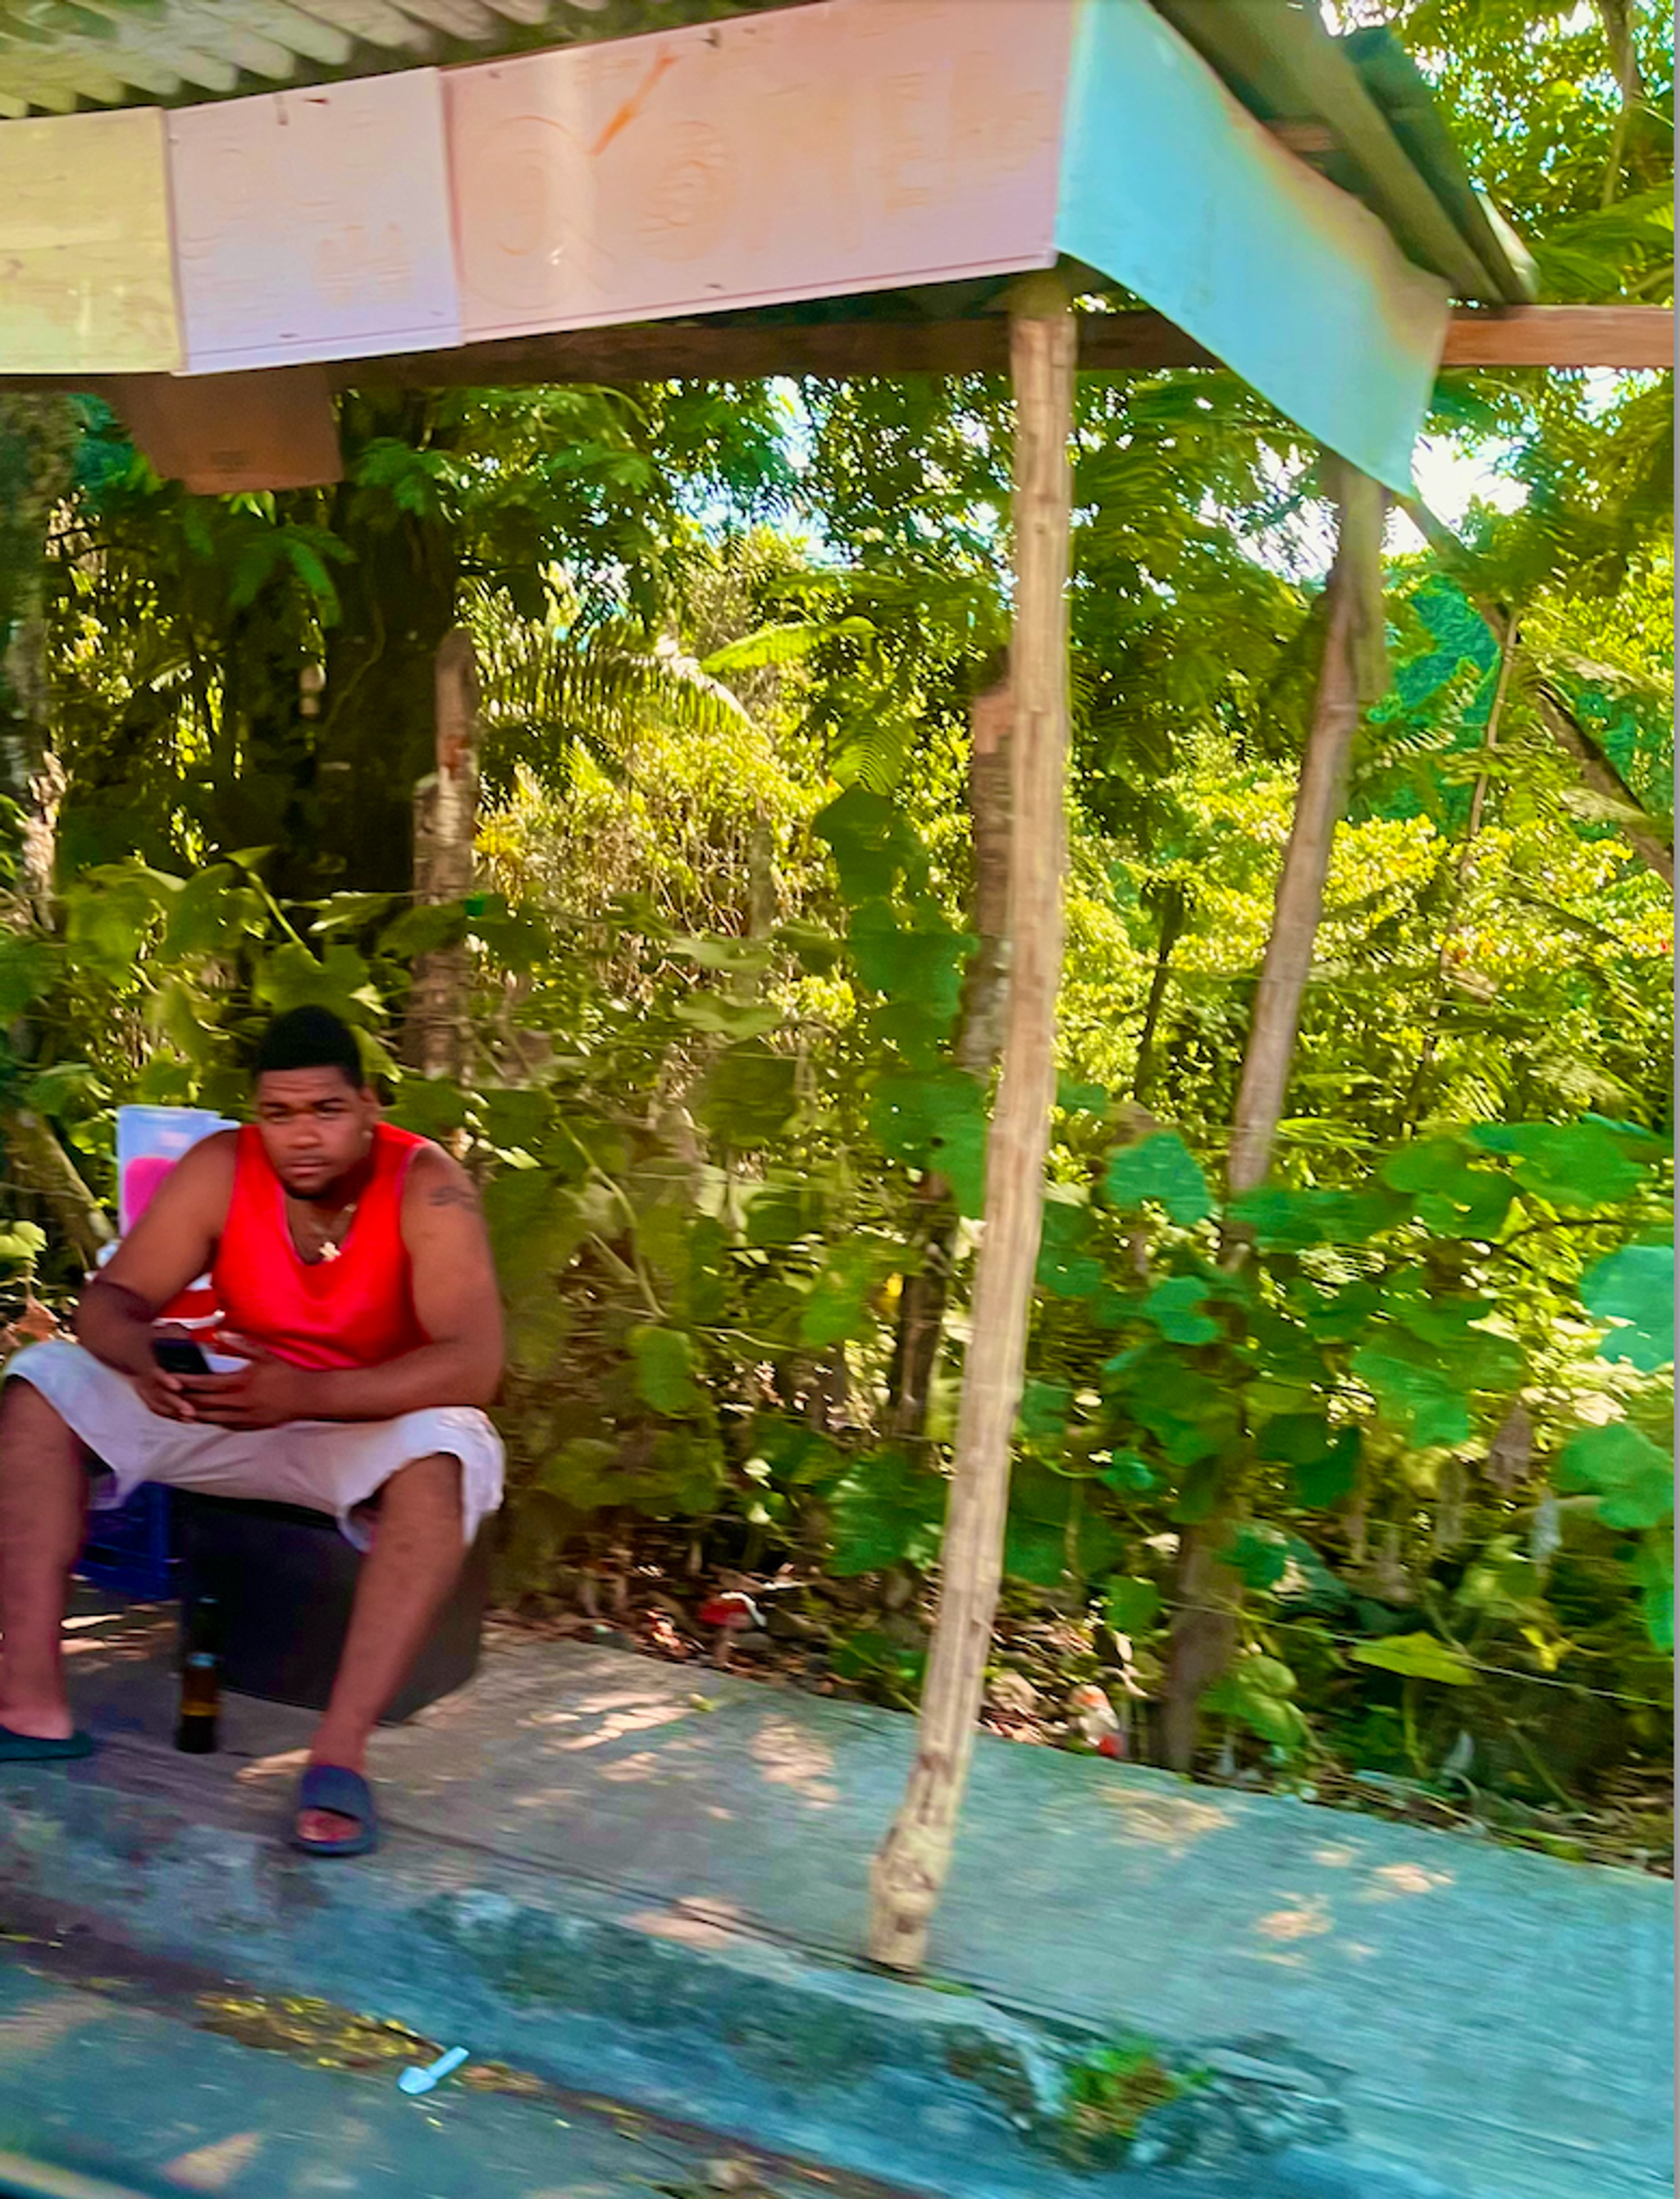 A young man in the Dominican Republic sits under a pavilion with a corrugated metal roof with a wall of green leafy foliage behind him. He wears a bright red tank top, has light brown skin, and looks at us with his elbows resting on his knees.